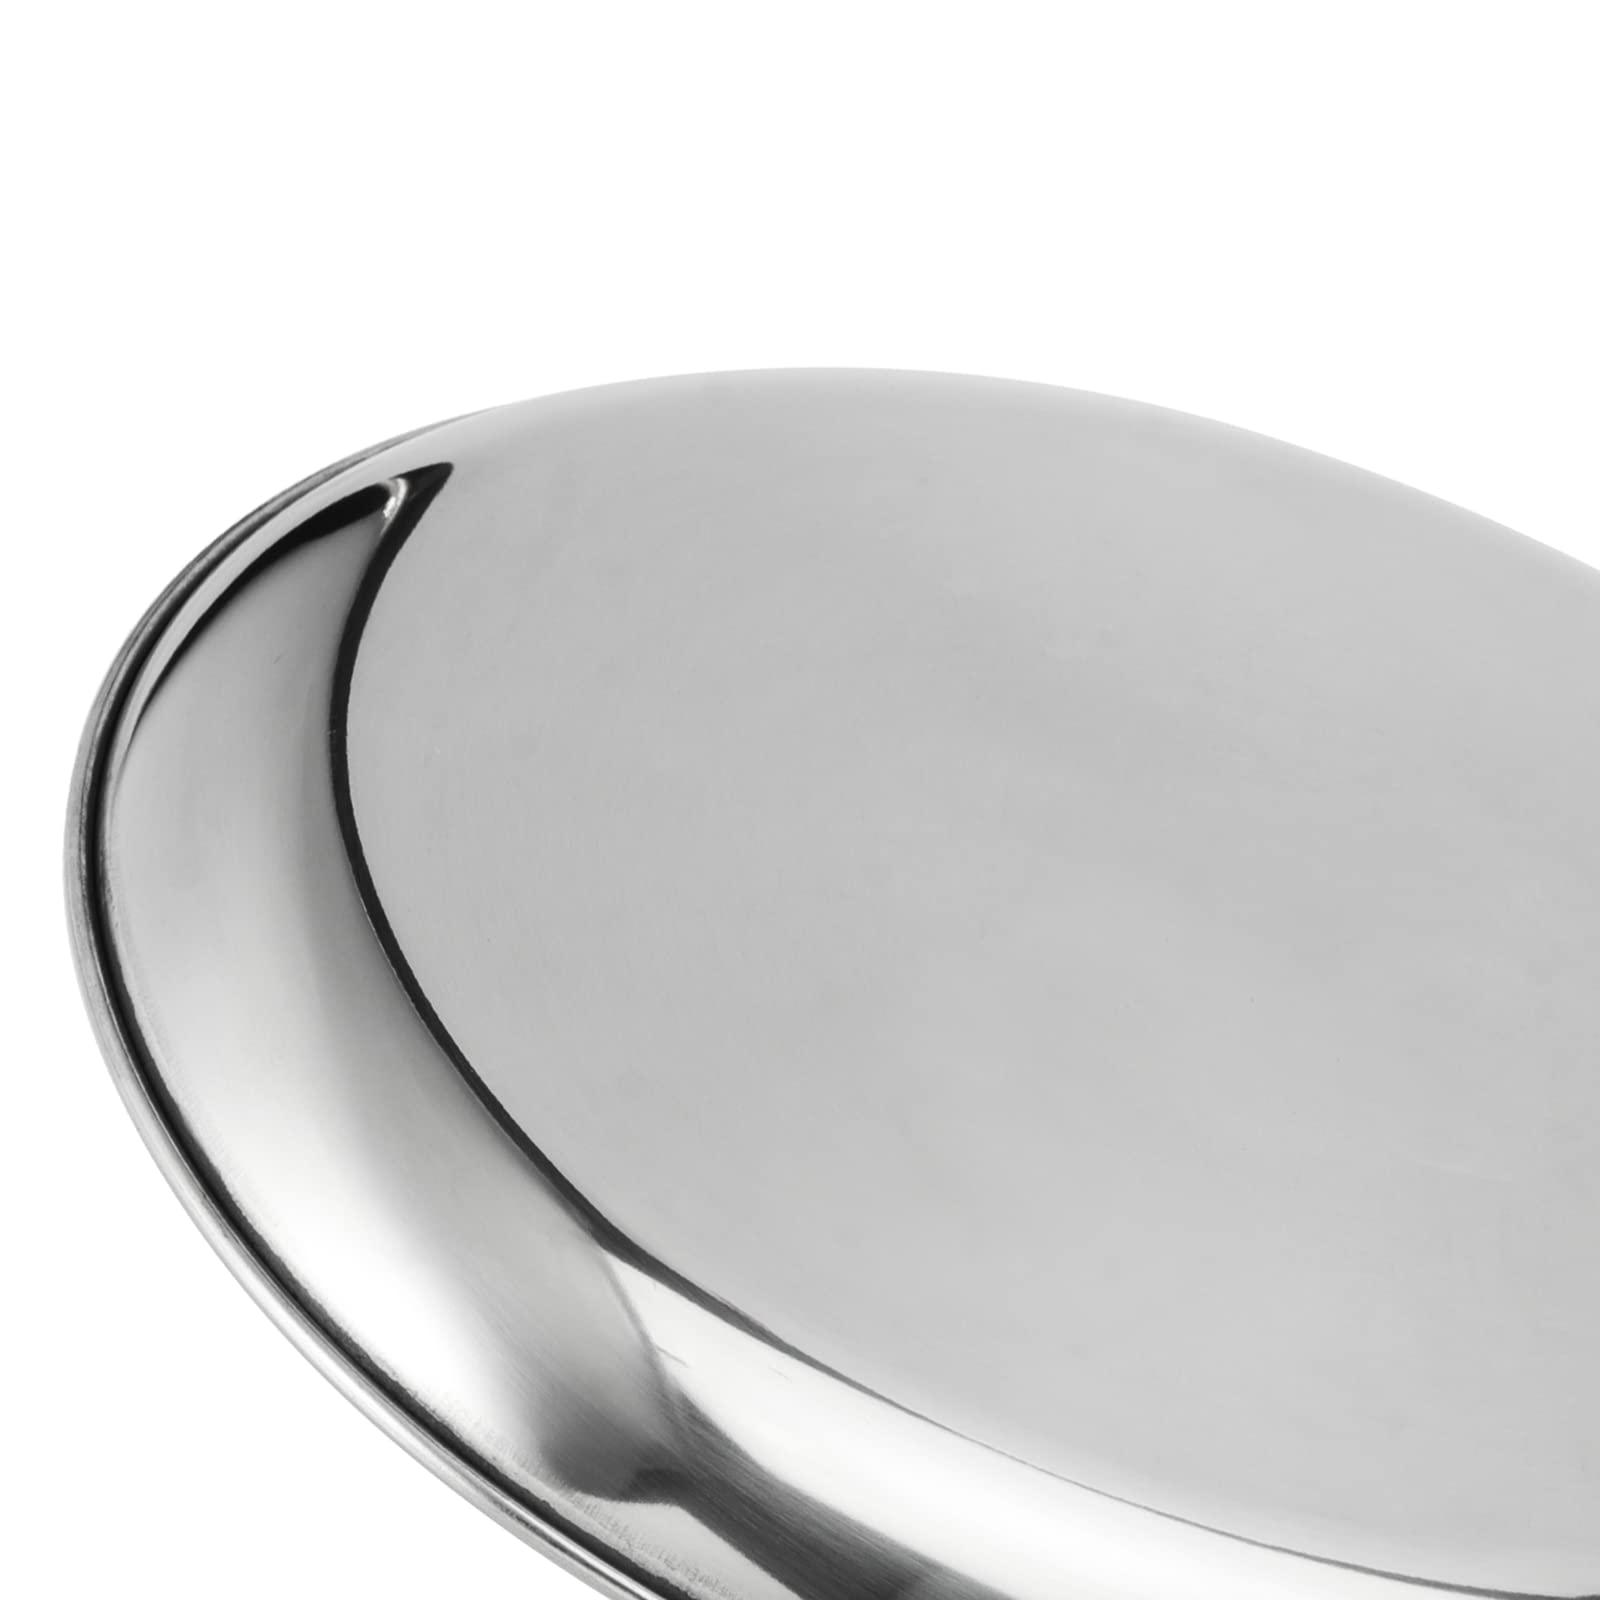 MUKCHAP 4 PCS 10 Inch Stainless Steel Plates, Round Metal Dinner Plate, Stainless Steel Dinner Dishes for Parting, Outdoor Camping, Salad, Fruit, Dishwasher Safe, Silver